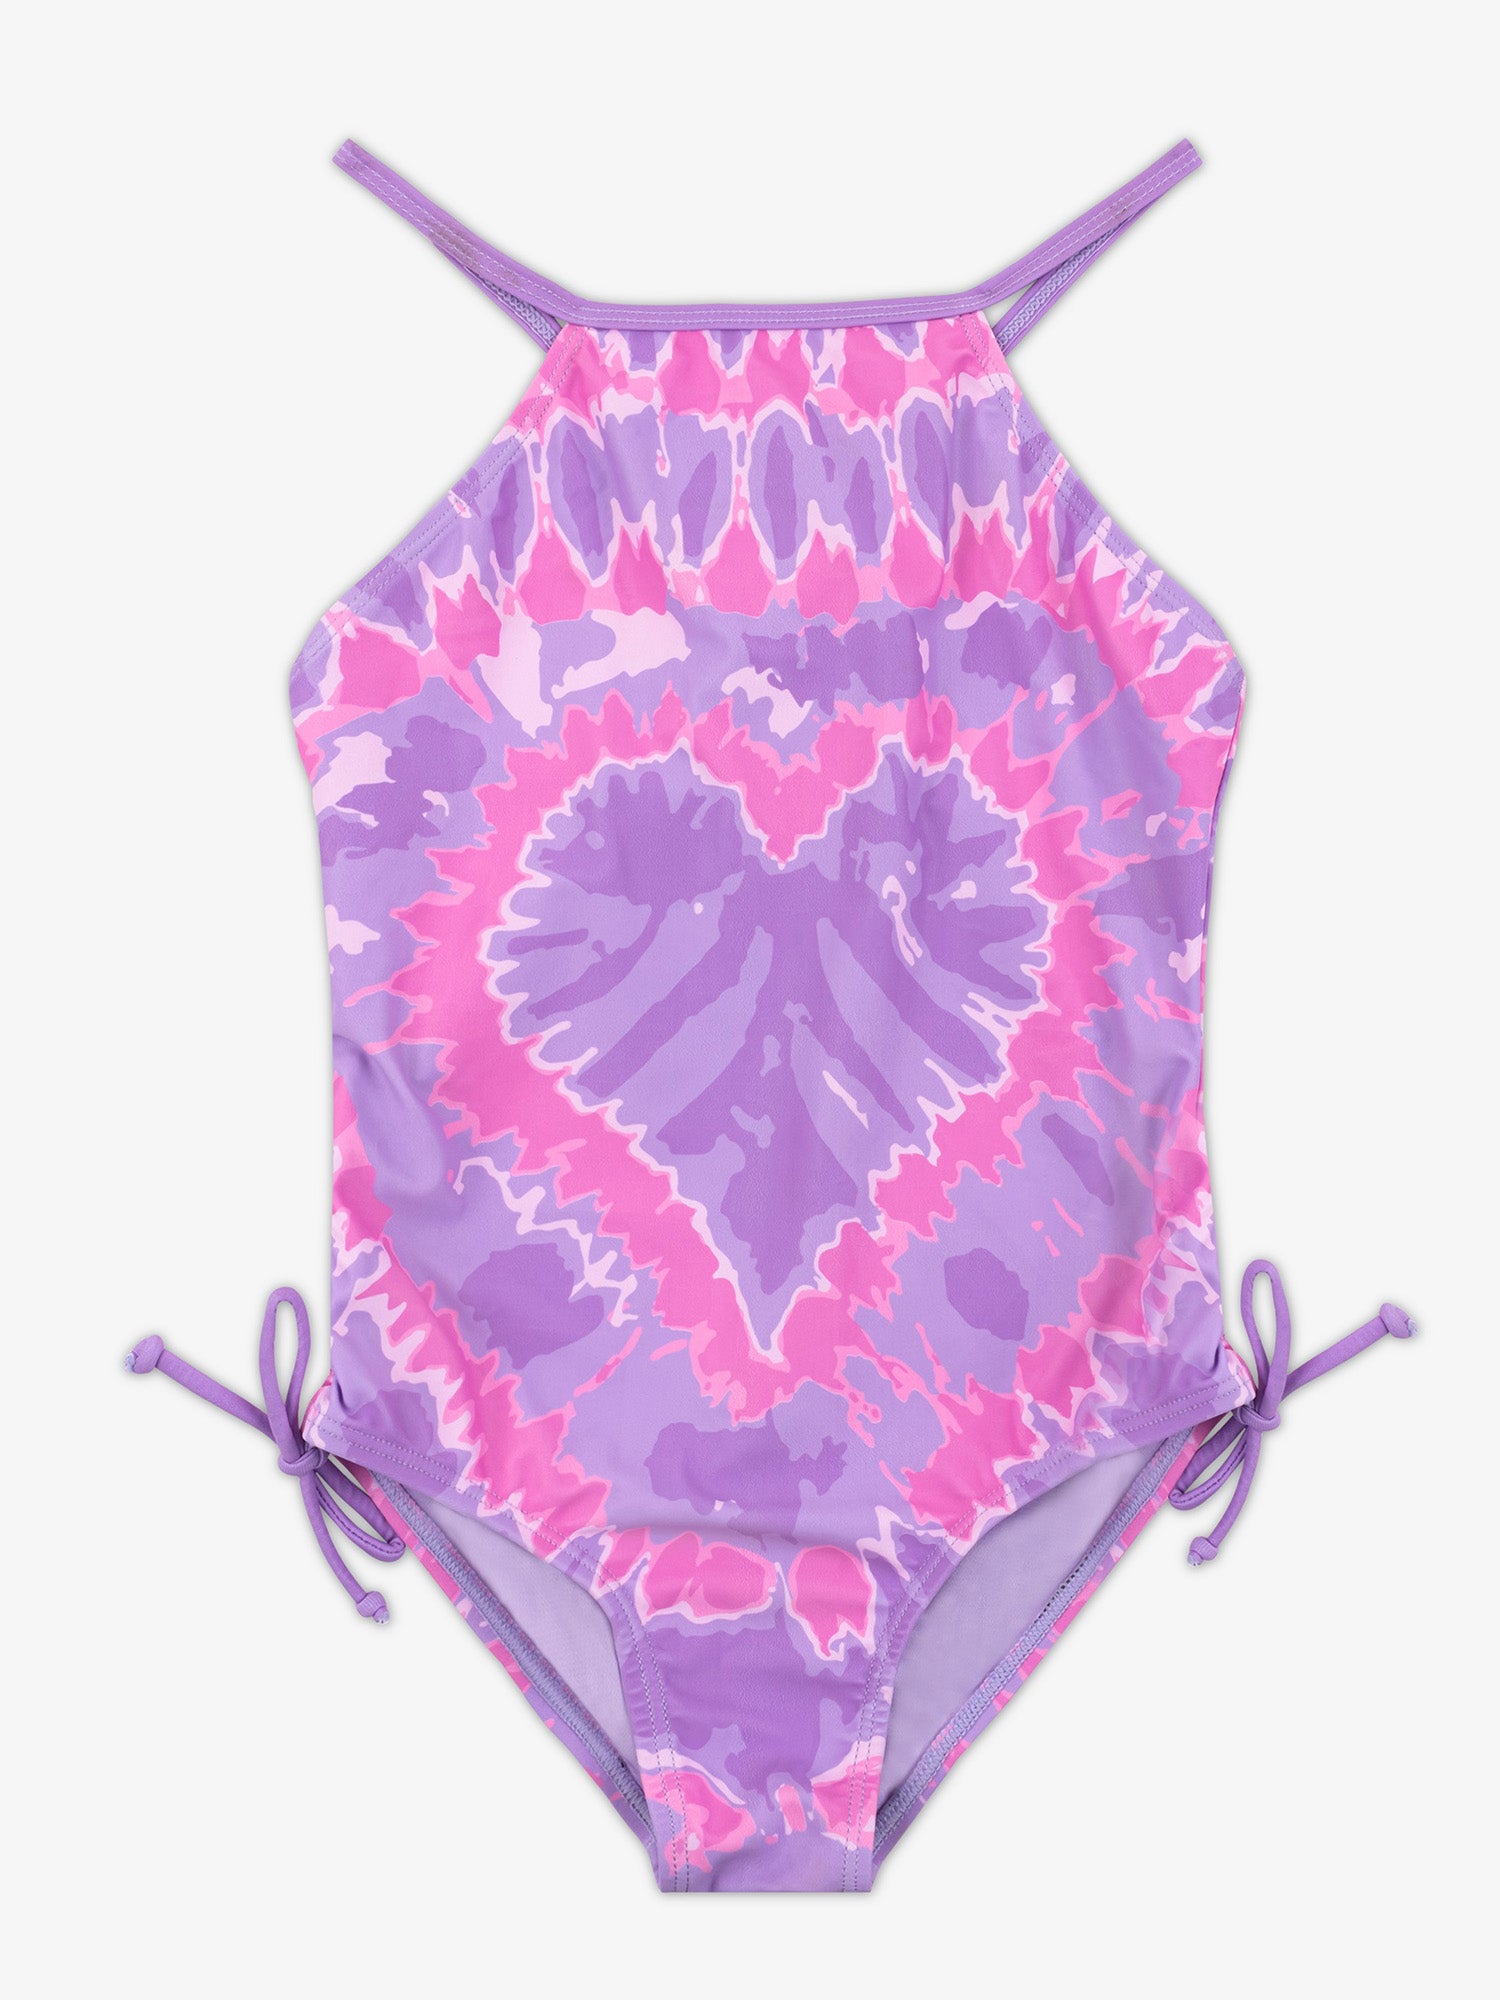 NAVEAH-Heart Print One Piece Swimsuit